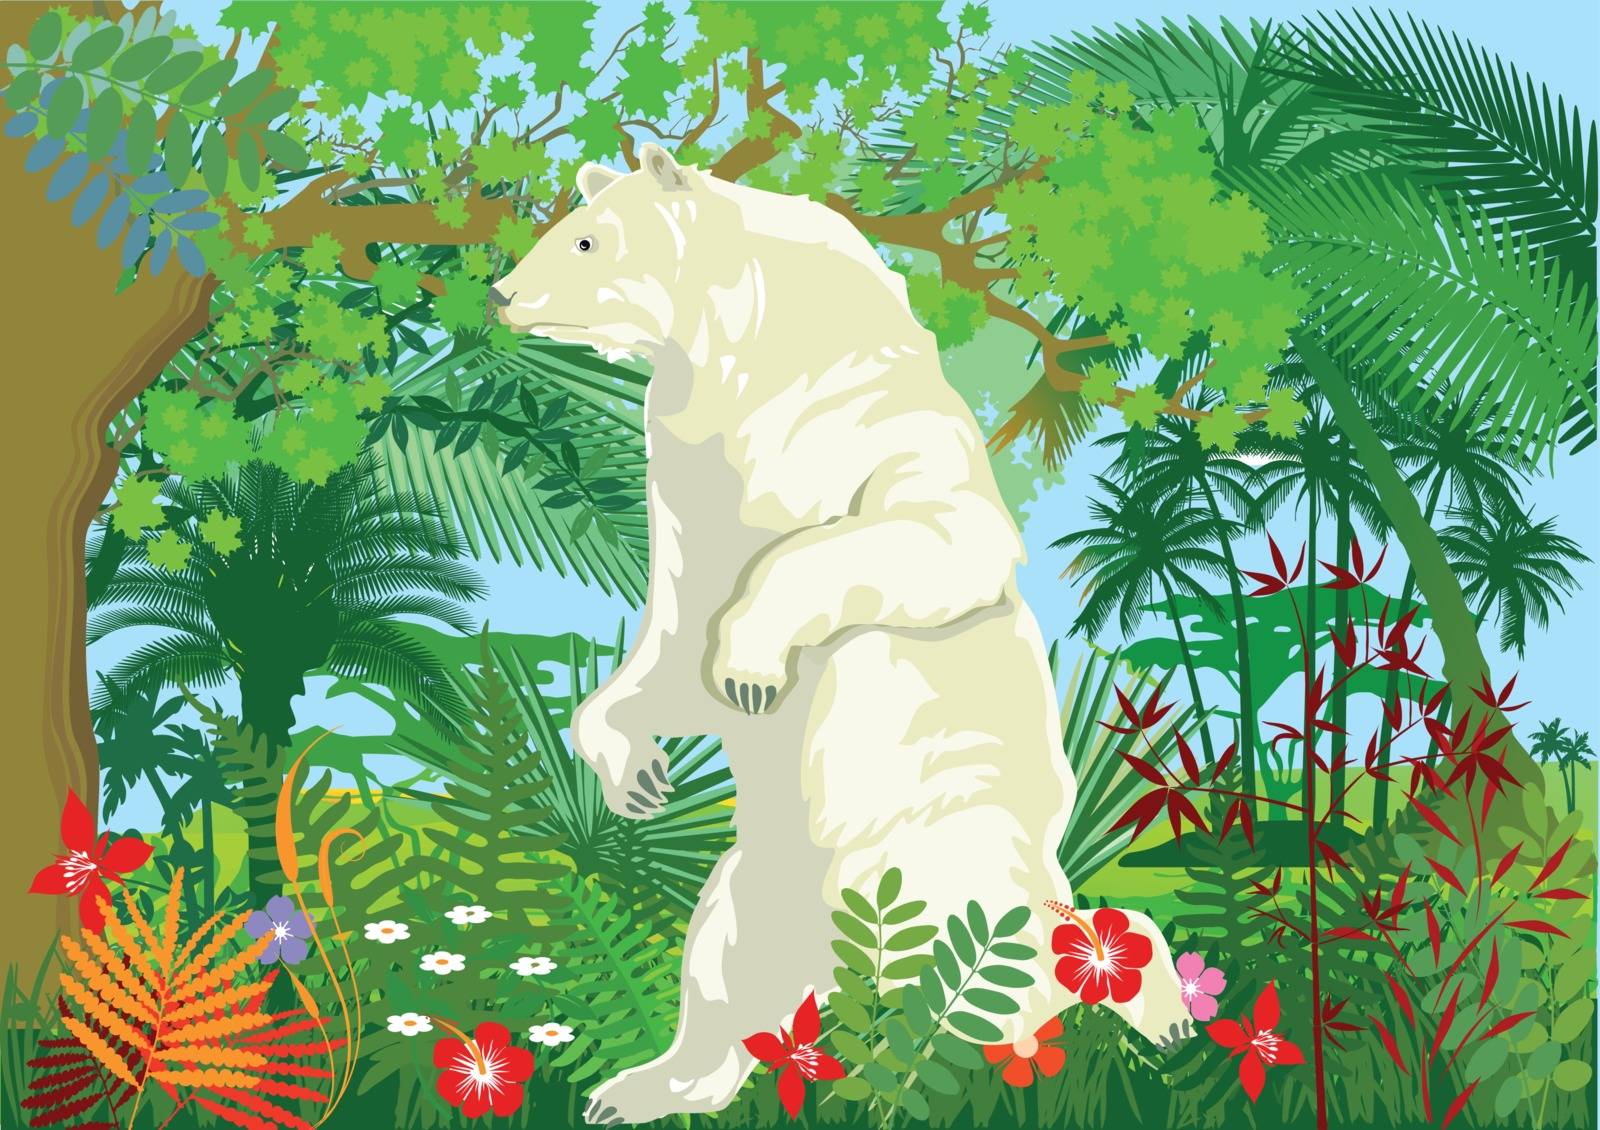 Global warming with polar bear in the jungle, illustration